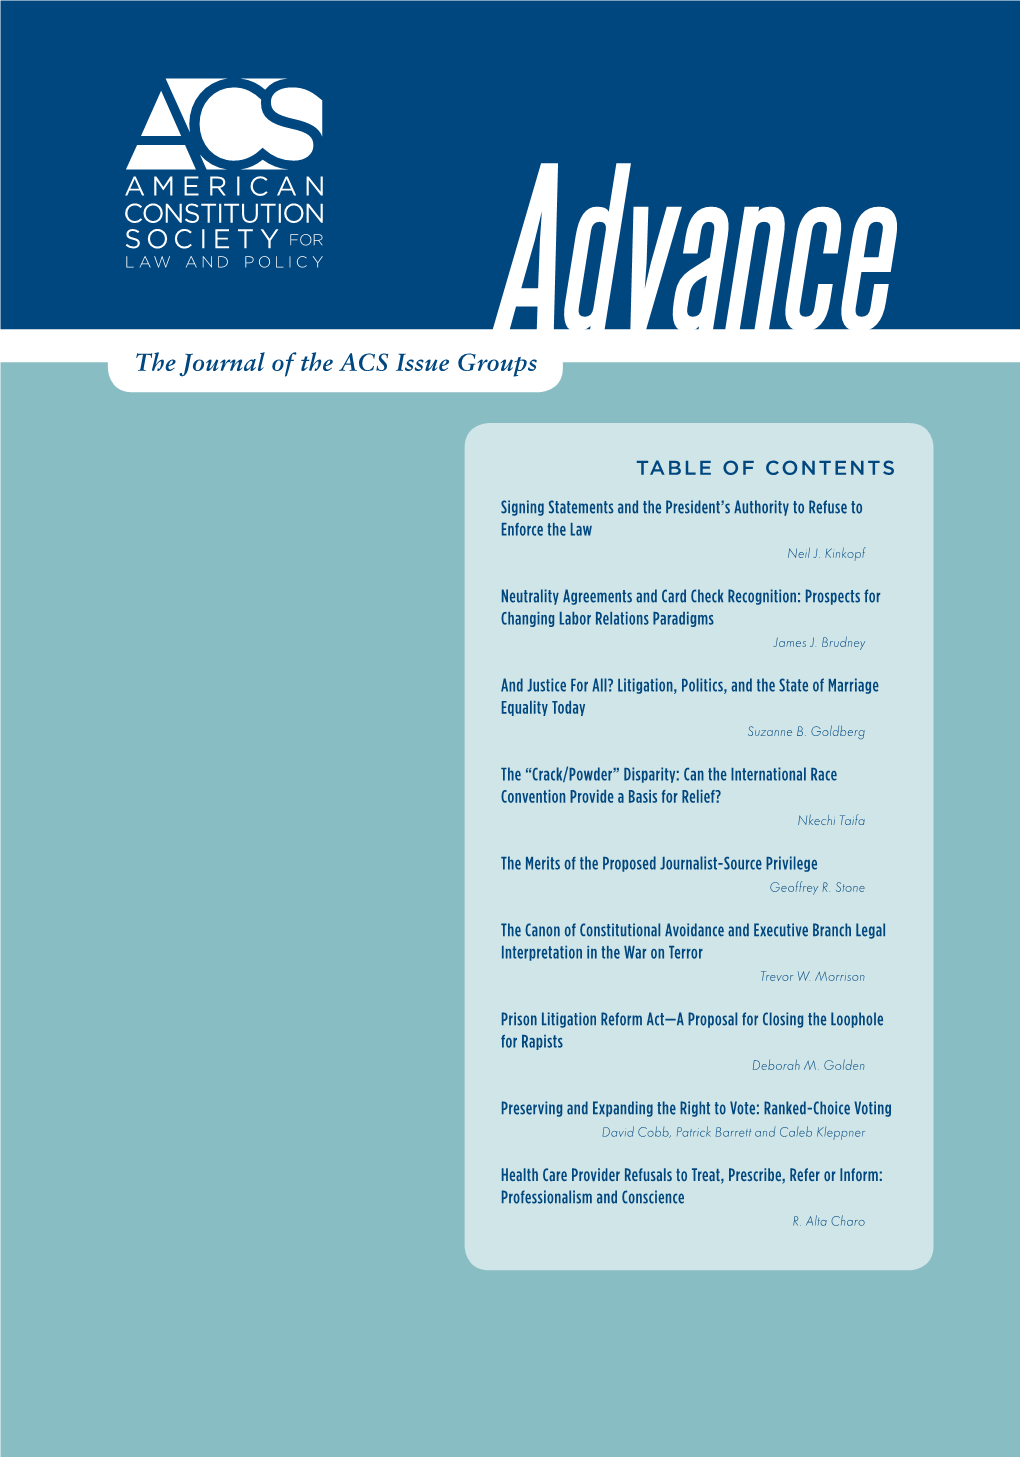 The Journal of the ACS Issue Groups